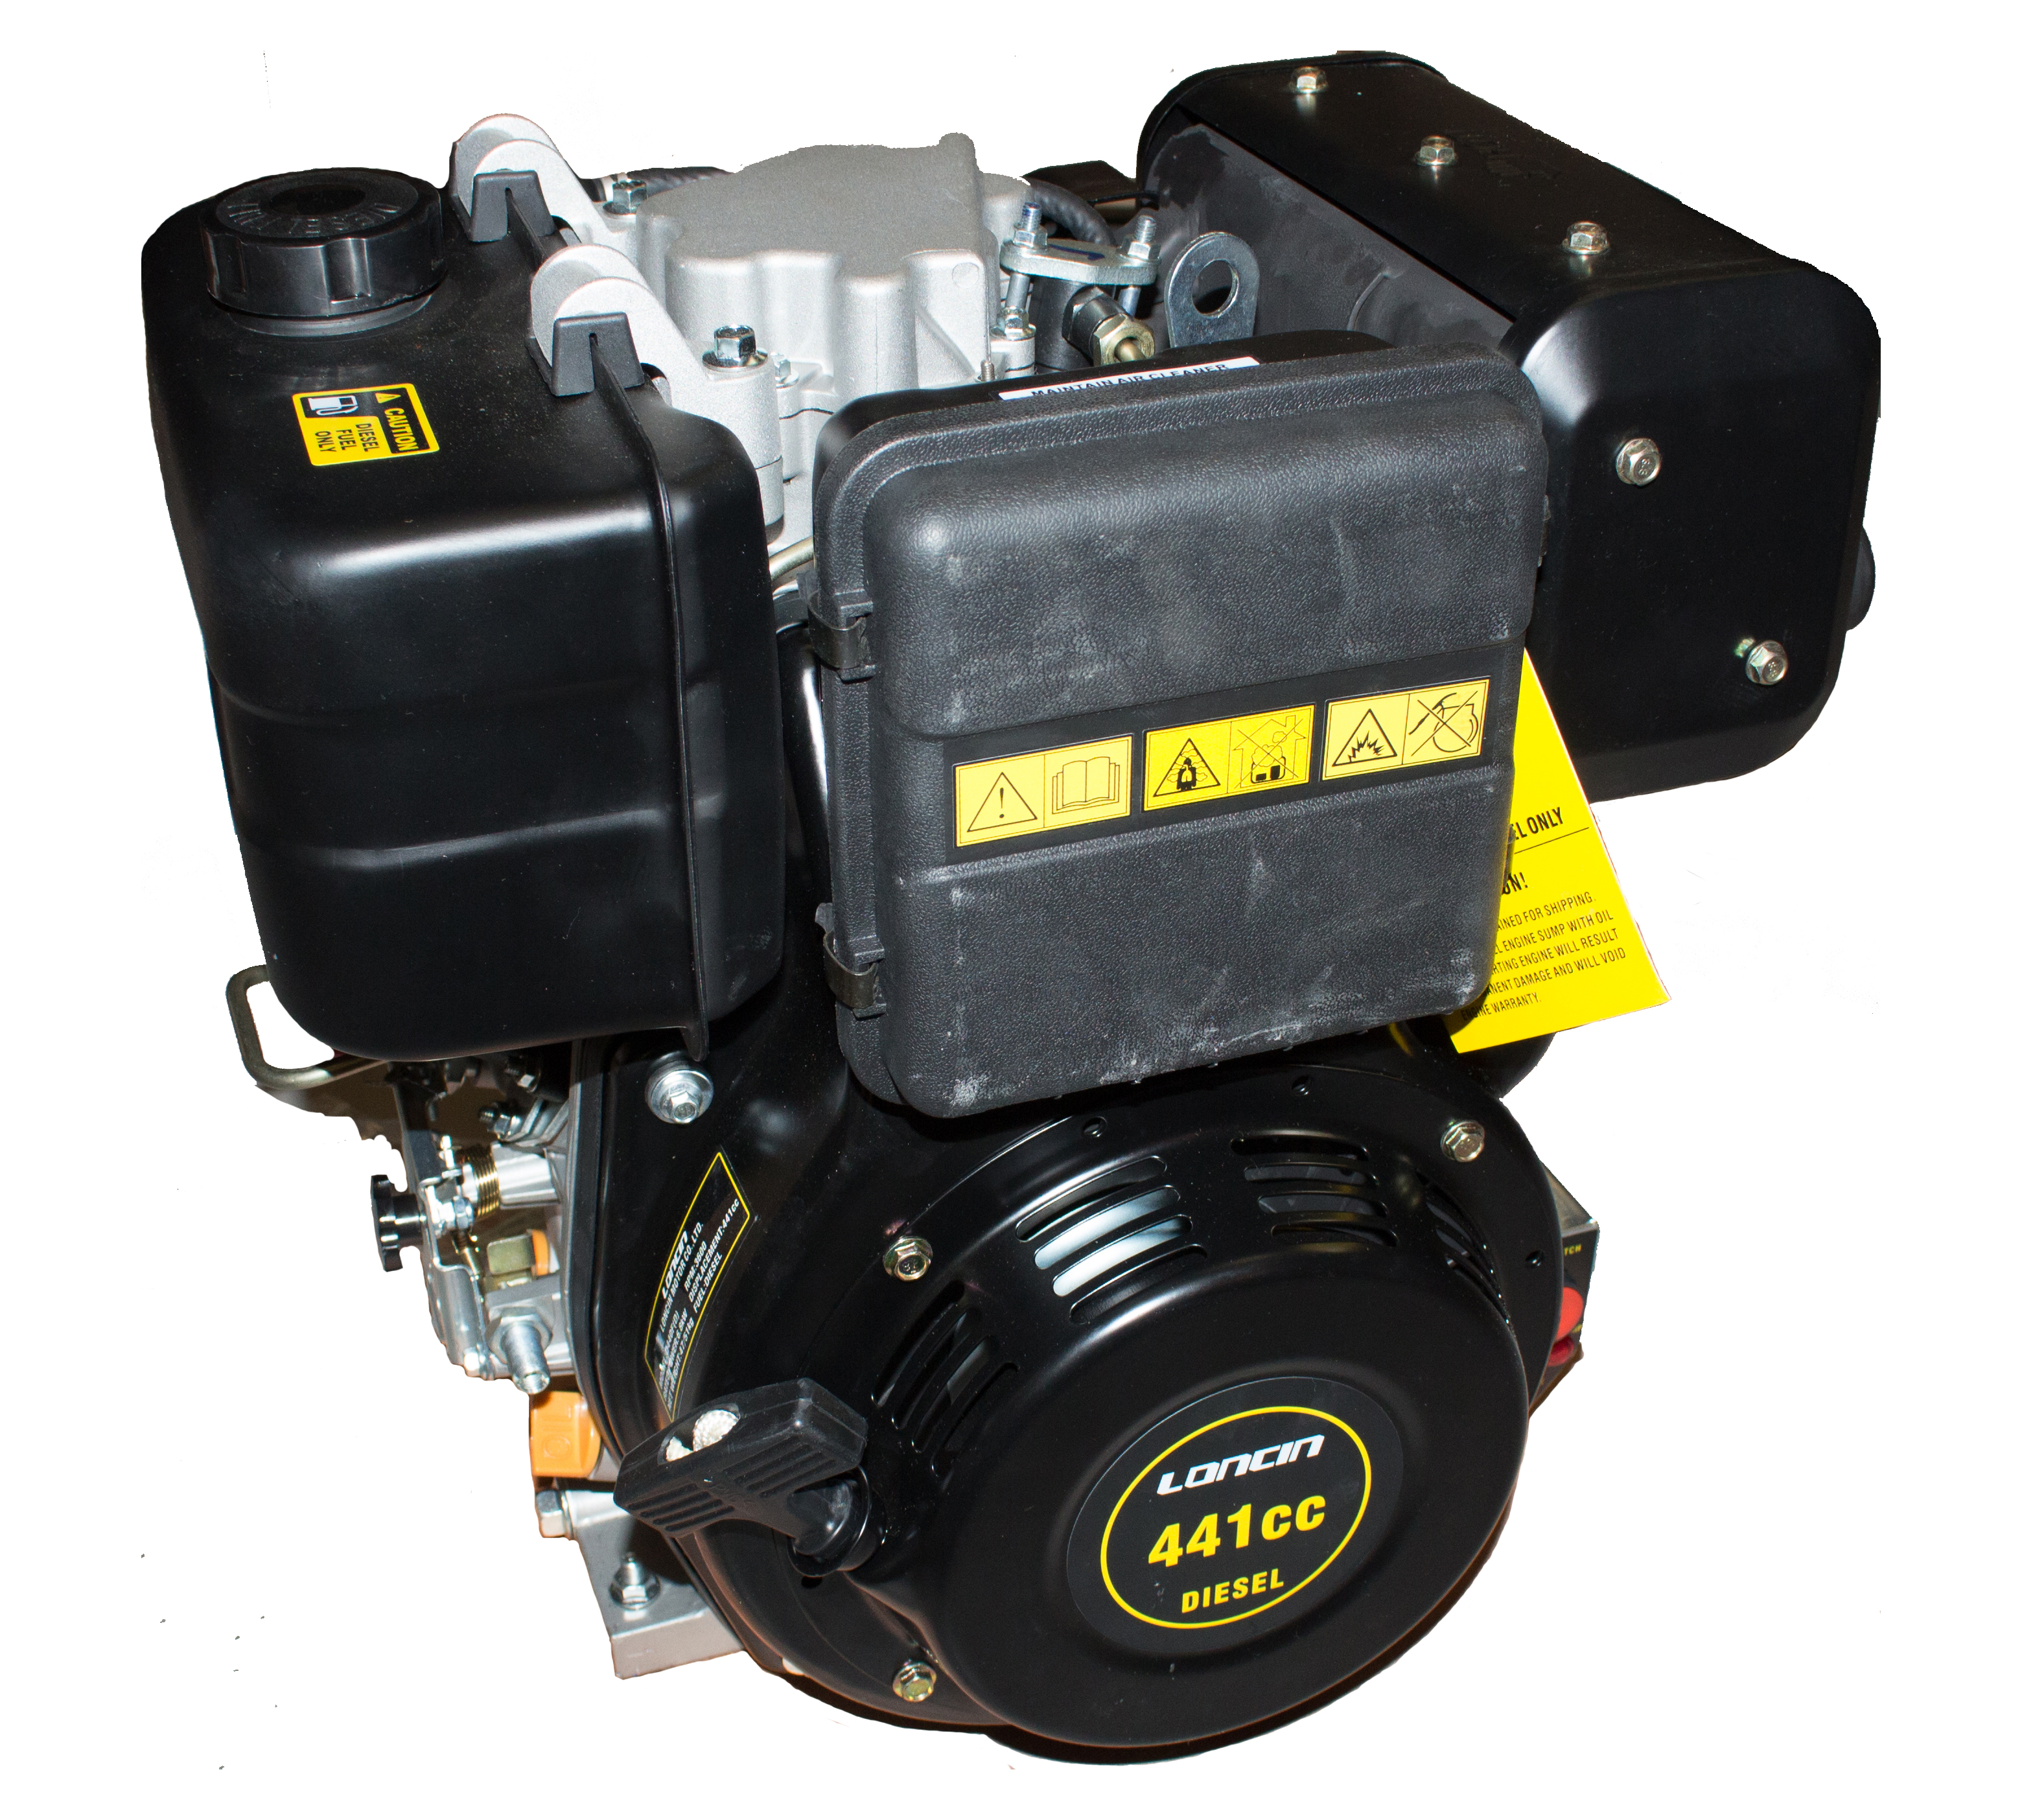 Loncin Diesel Engine, 9HP Single Cylinder, 4-Stroke Air Cooled Direct Injection